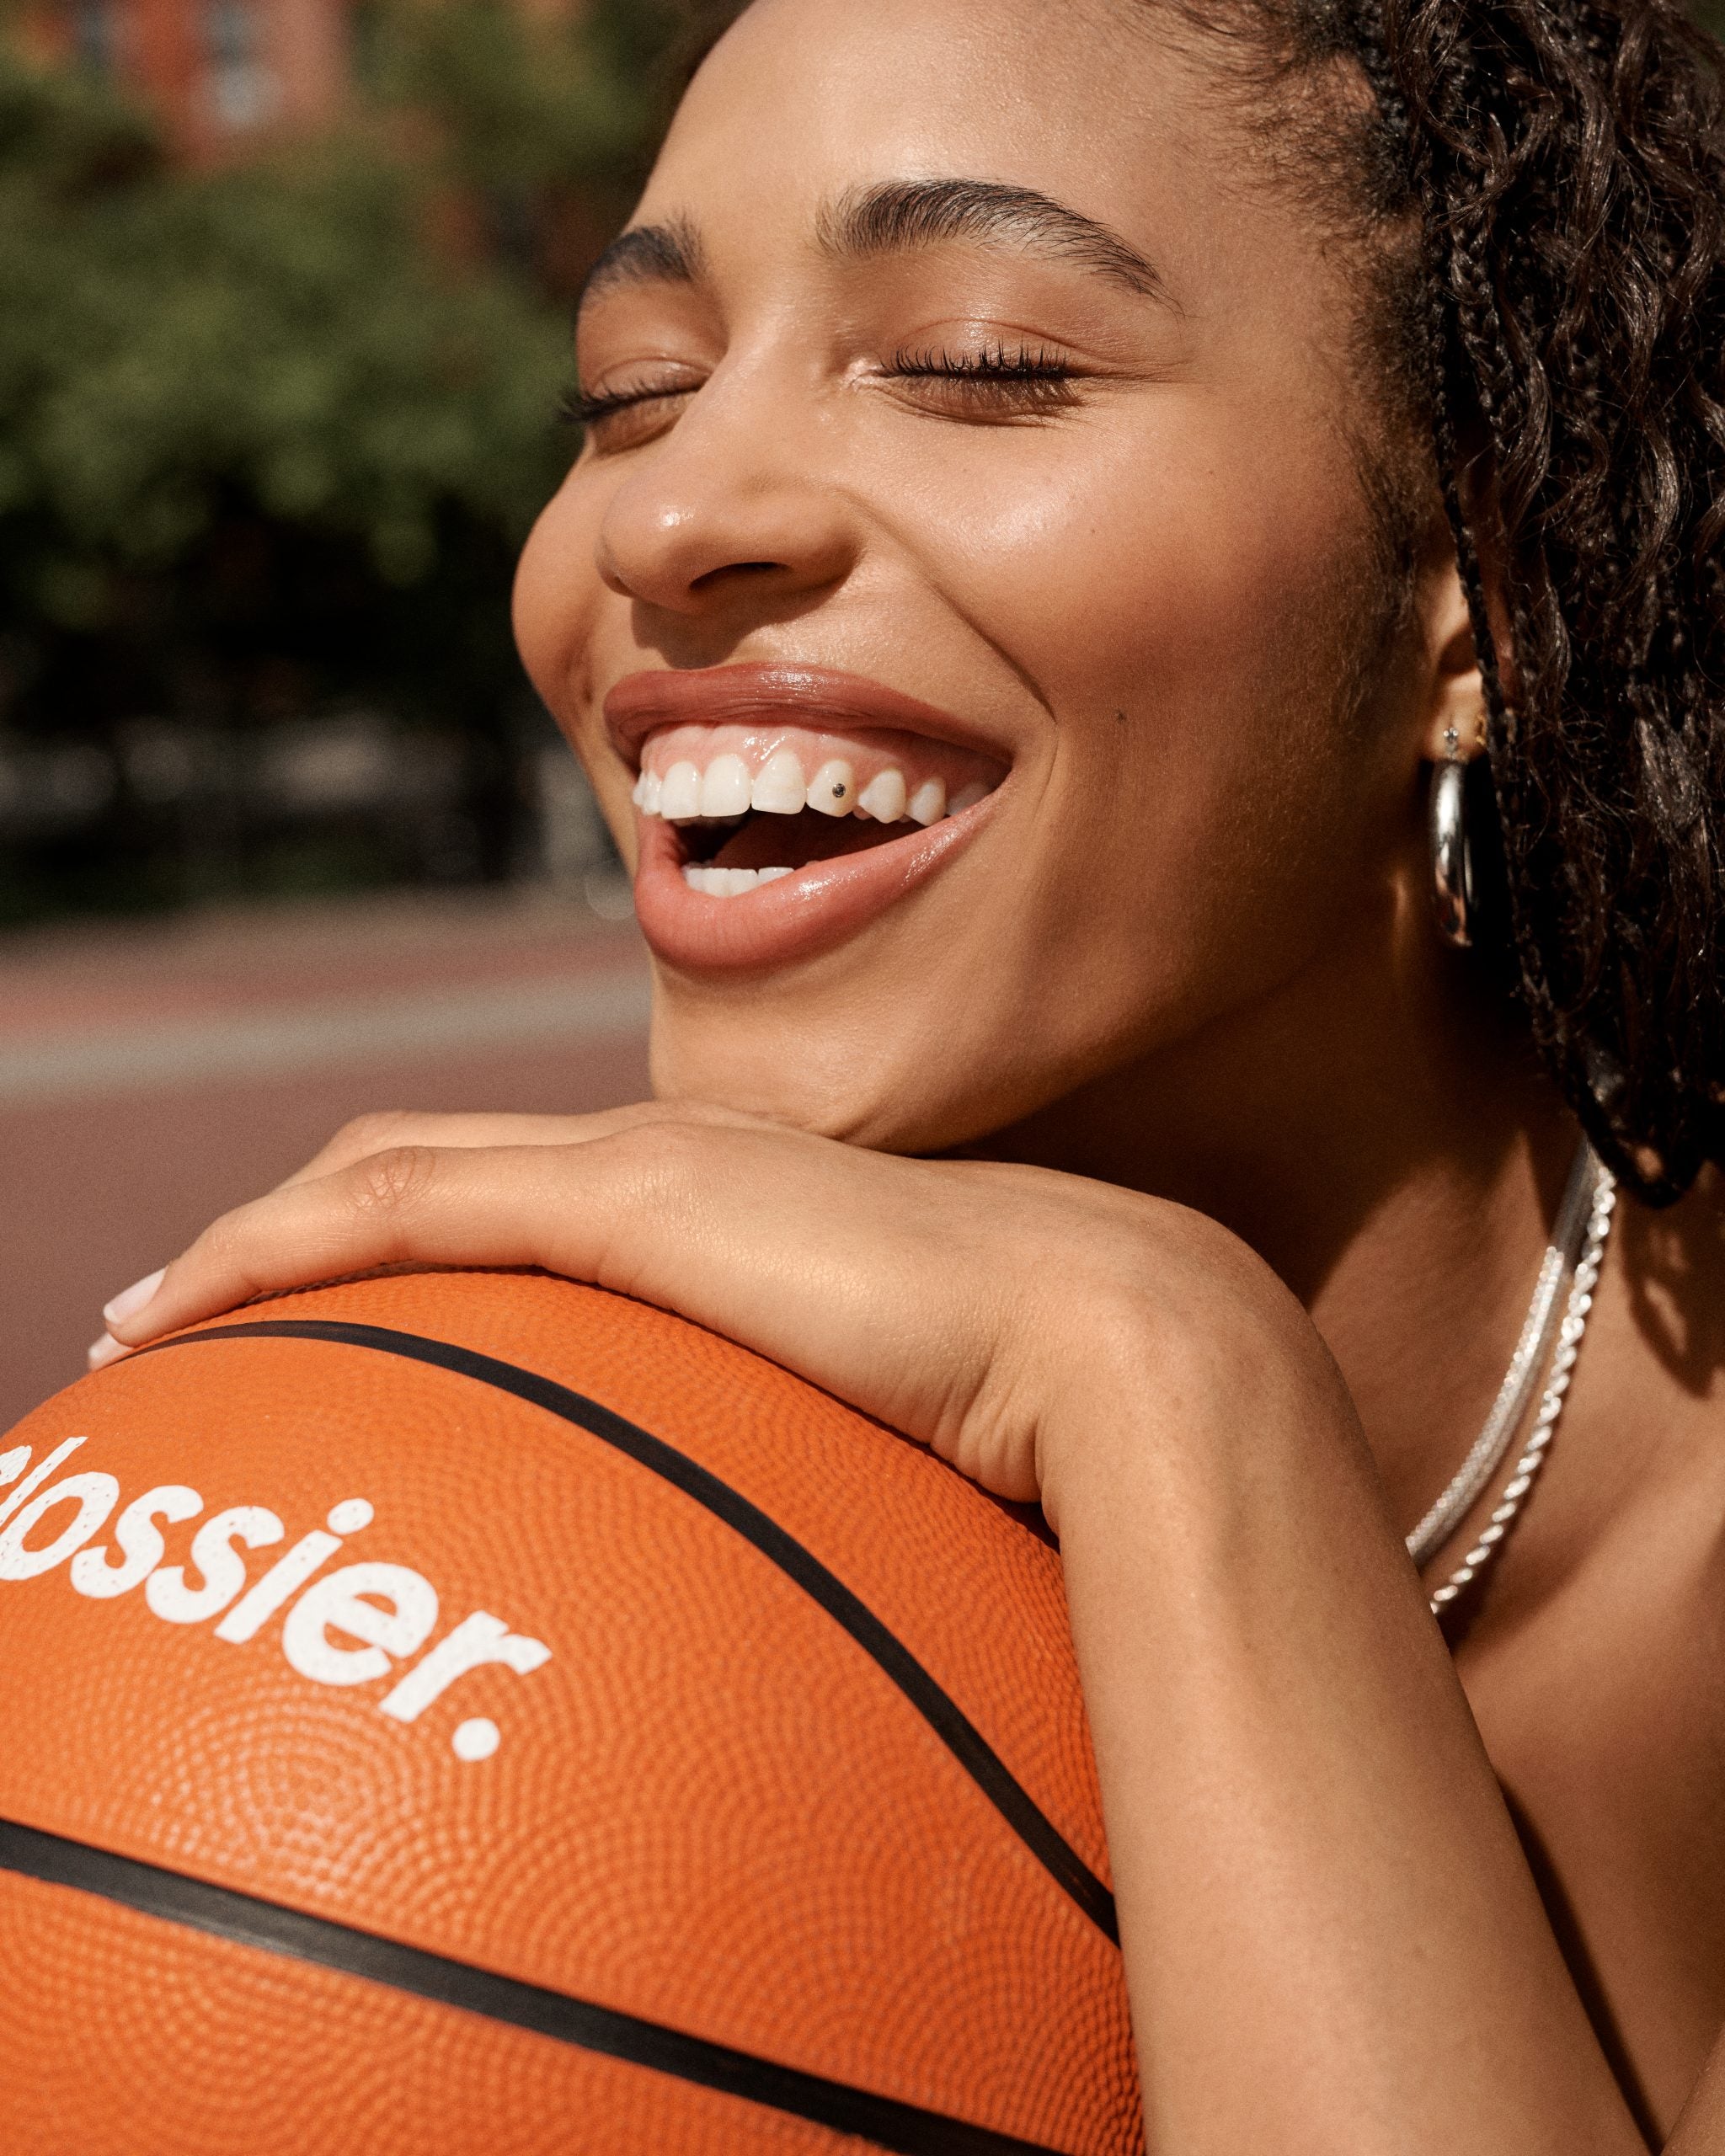 Glossier Leading In Inclusive Beauty With WNBA Partnership